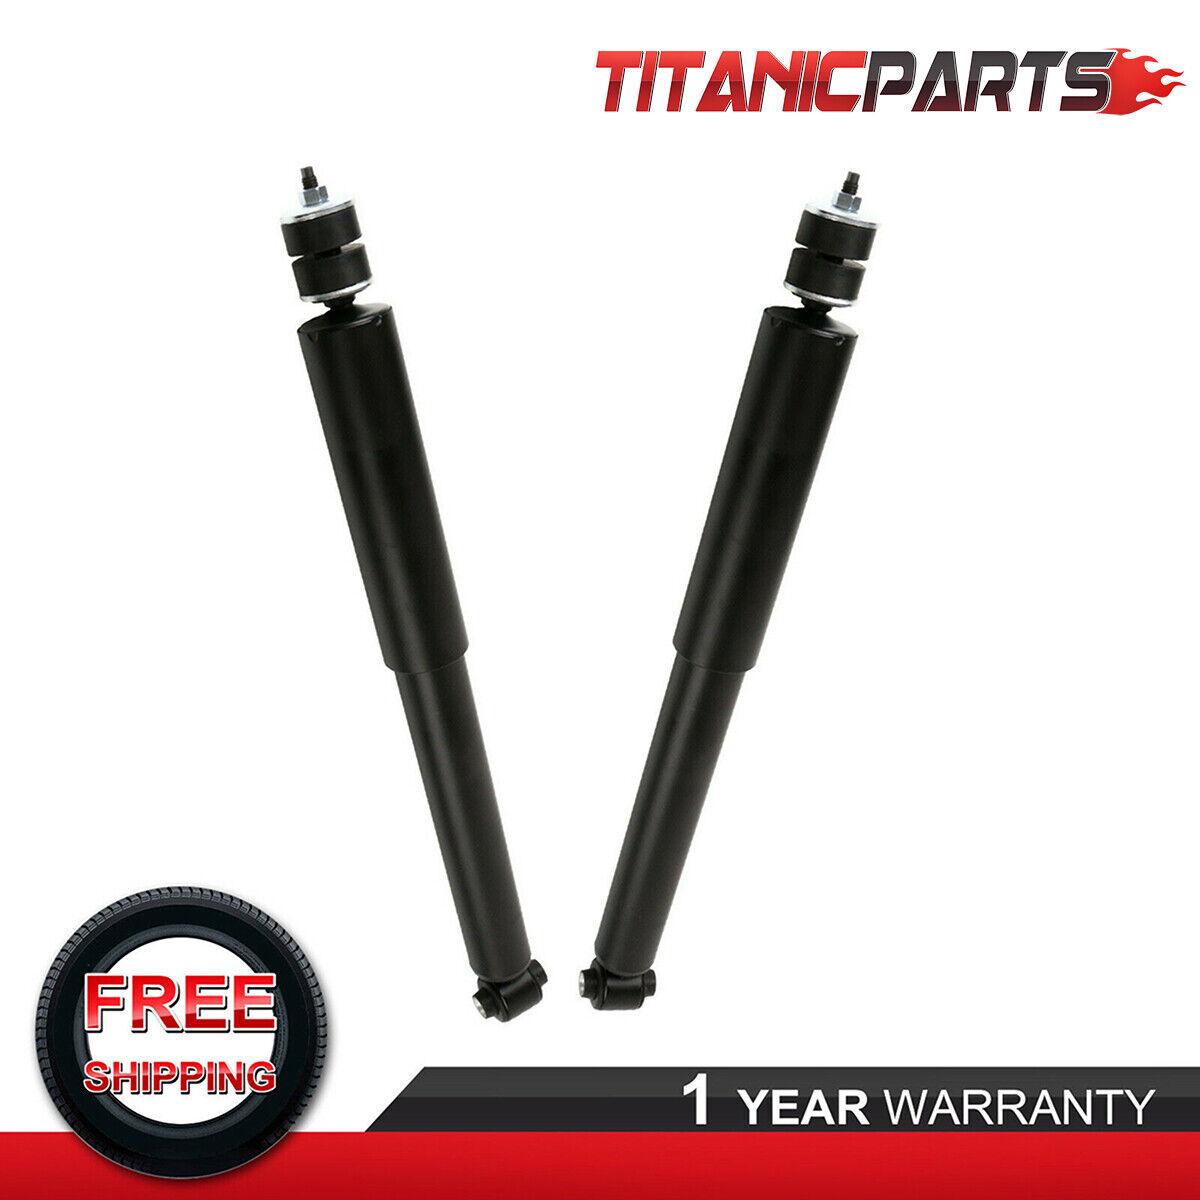 Rear Shocks Struts Absorbers For 2005-2014 Ford Mustang Pair(2) Replaces 349026